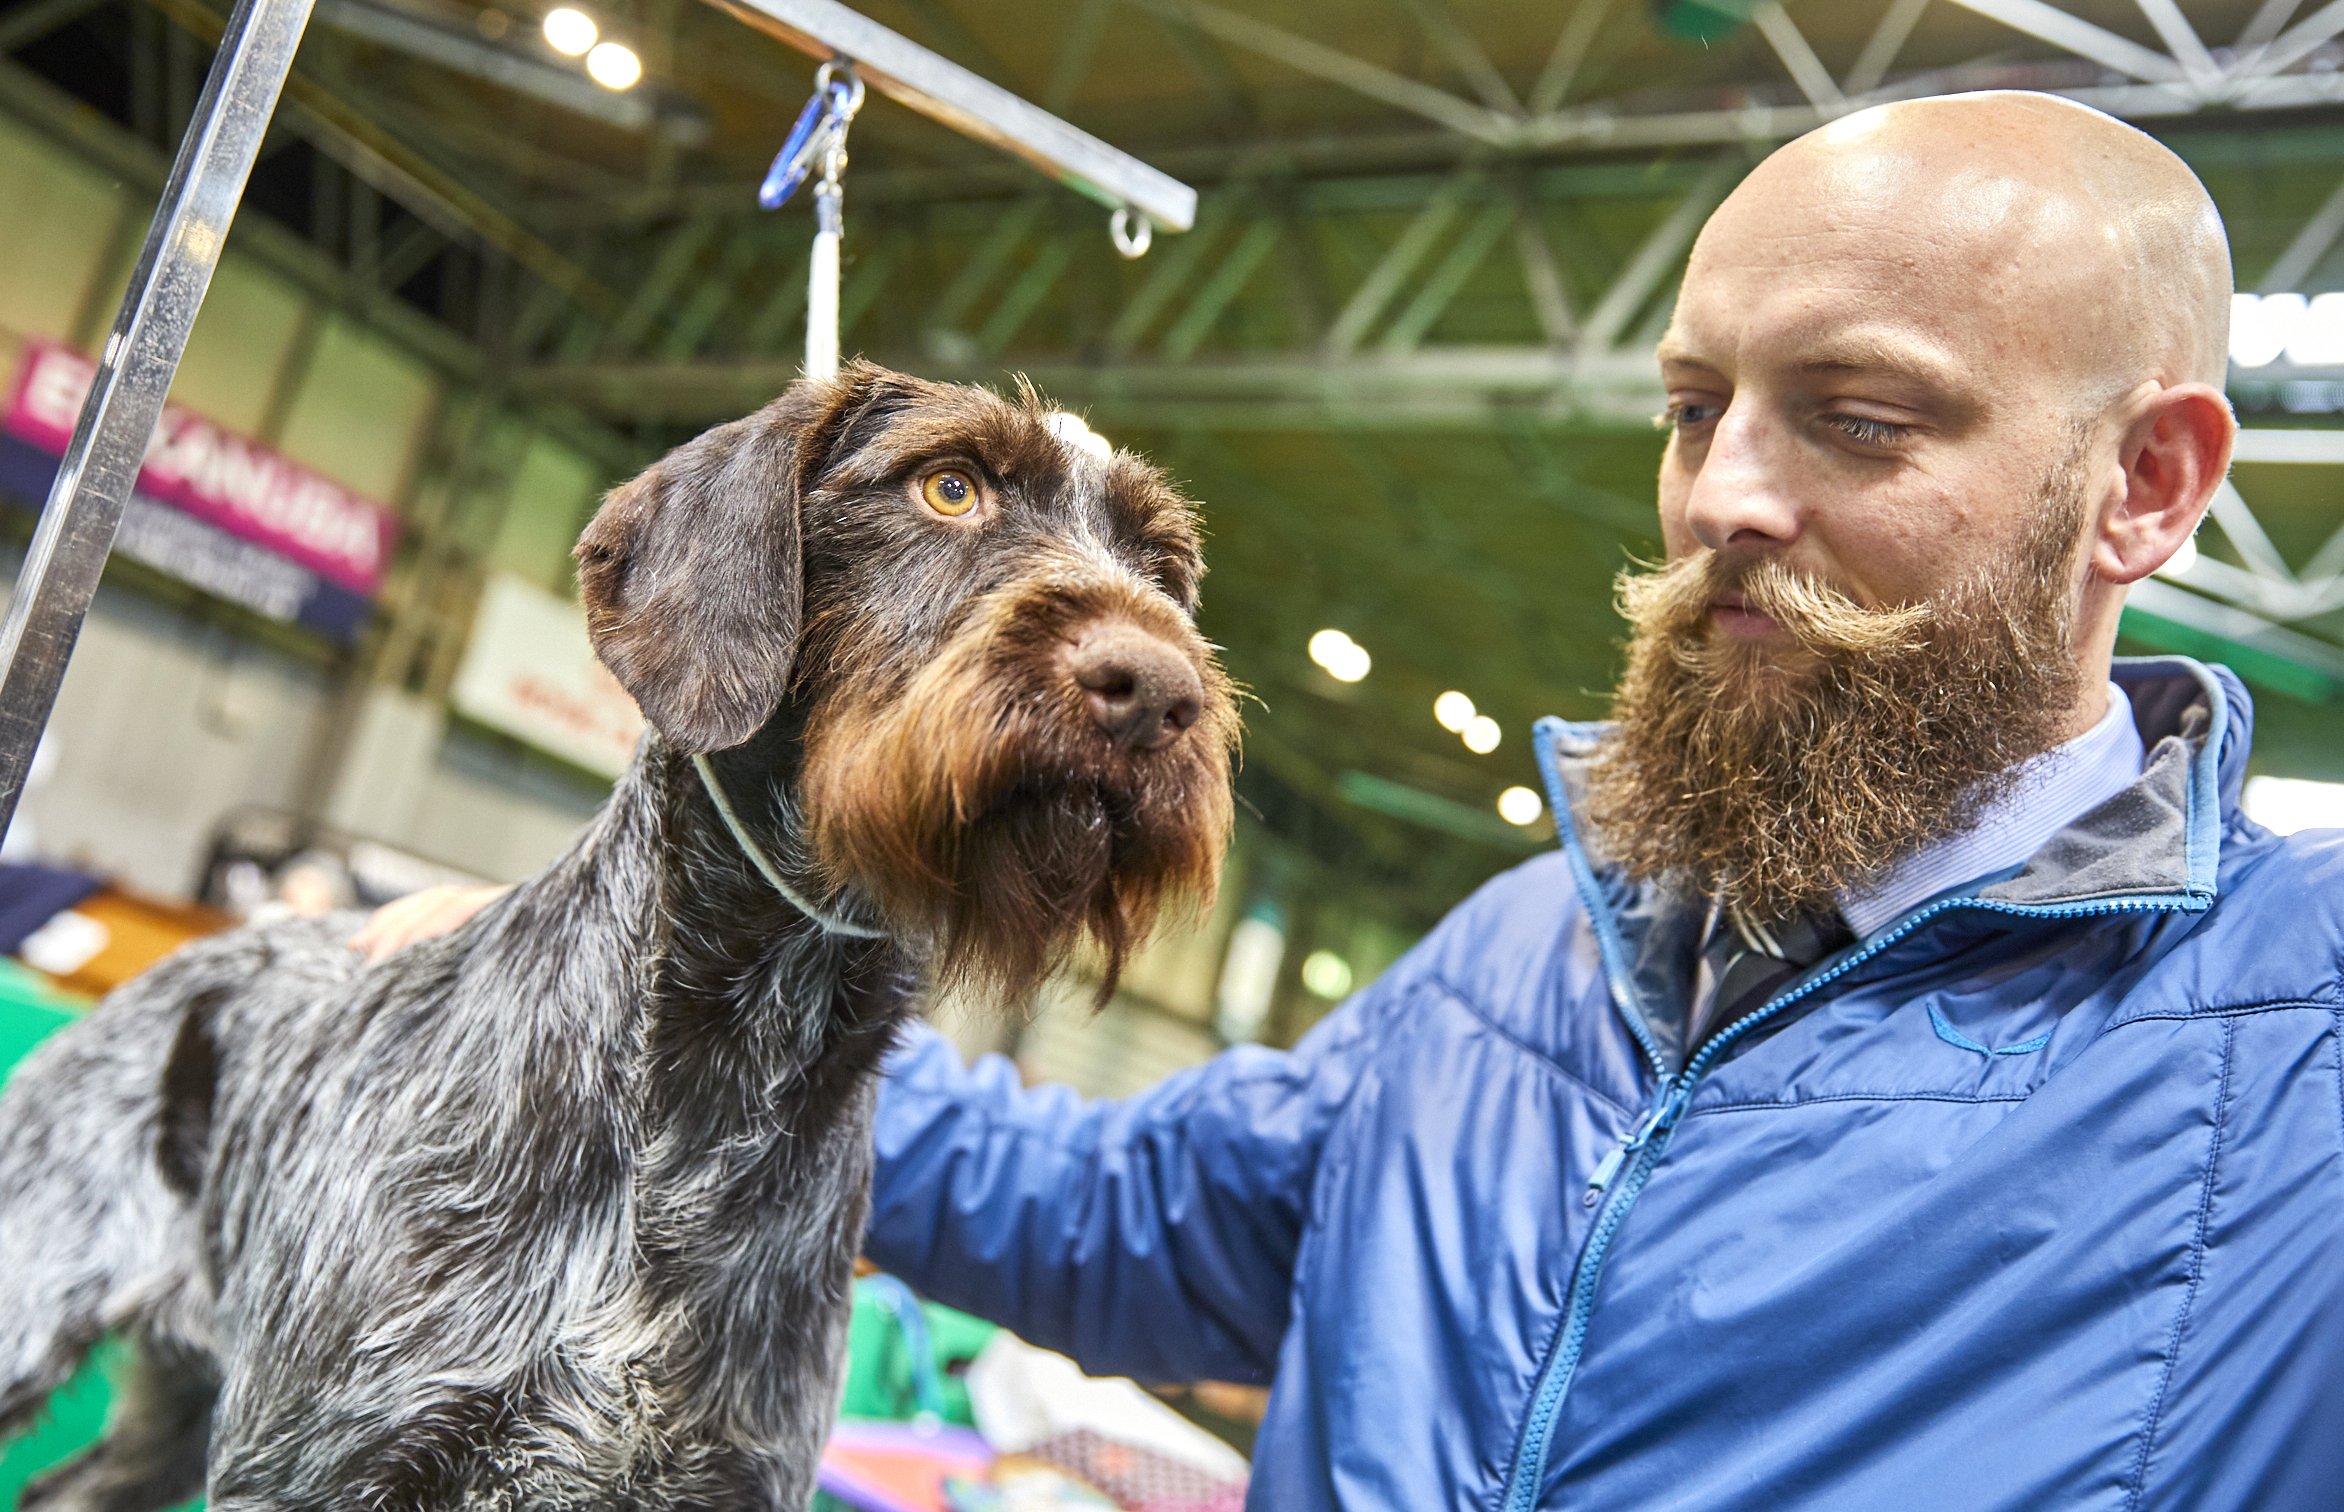  {dats} Copyright: Flick.digitalFree for editorial use image, please credit: Dave Phillips/ Flick.digitalGerman Wirehaired Pointer at Crufts 2022 at the NEC in Birmingham today.The world’s greatest dog show, Crufts, is taking place from 10th – 13th M